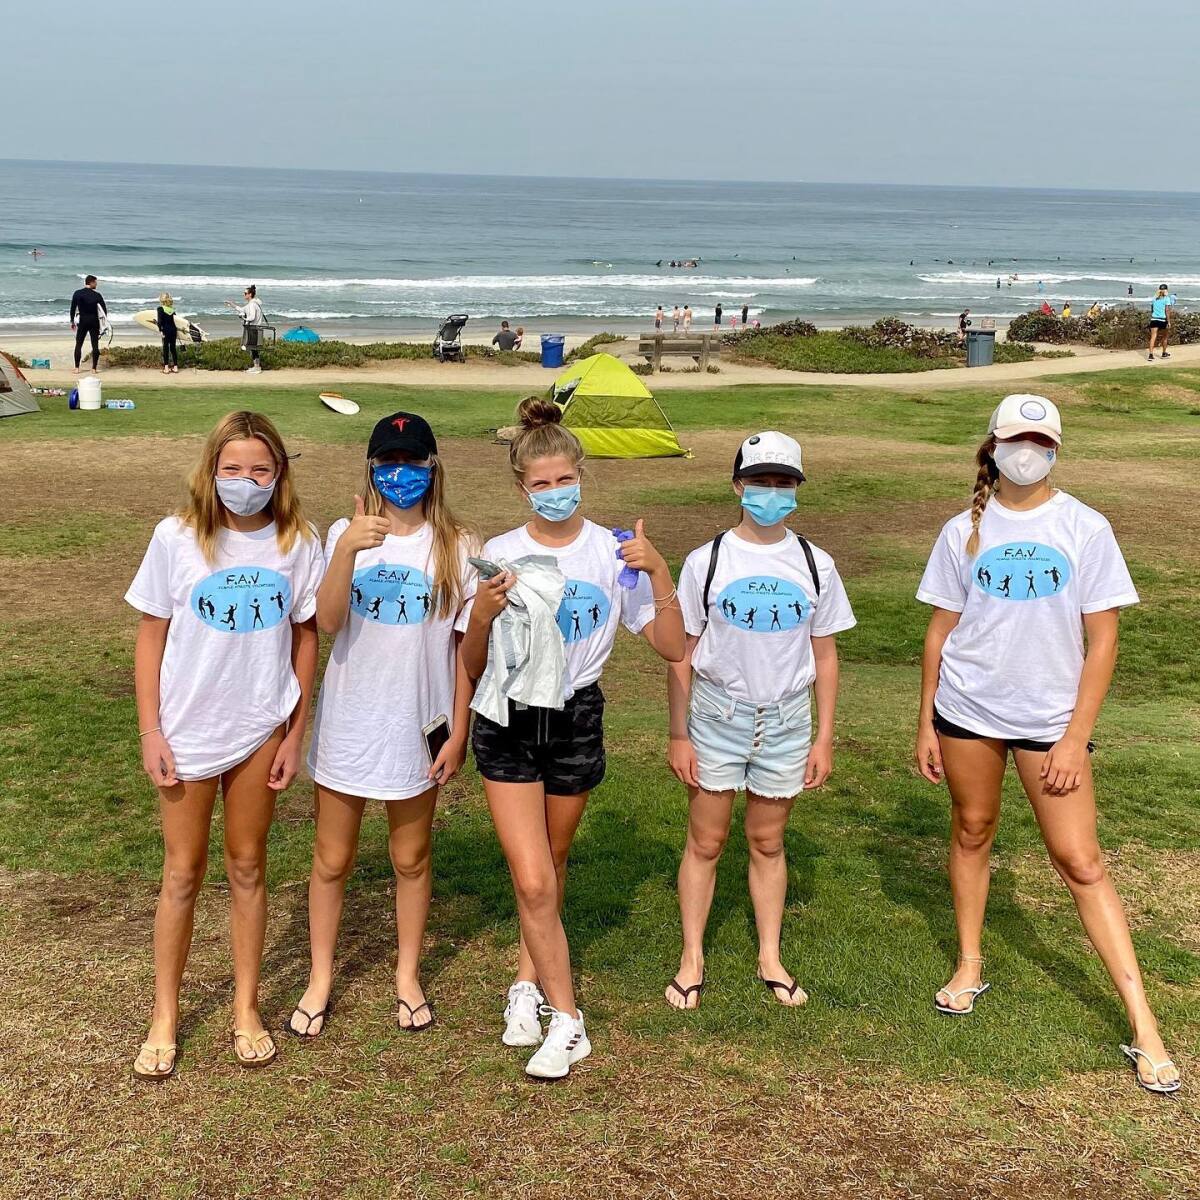 FAV volunteers at a recent beach cleanup.